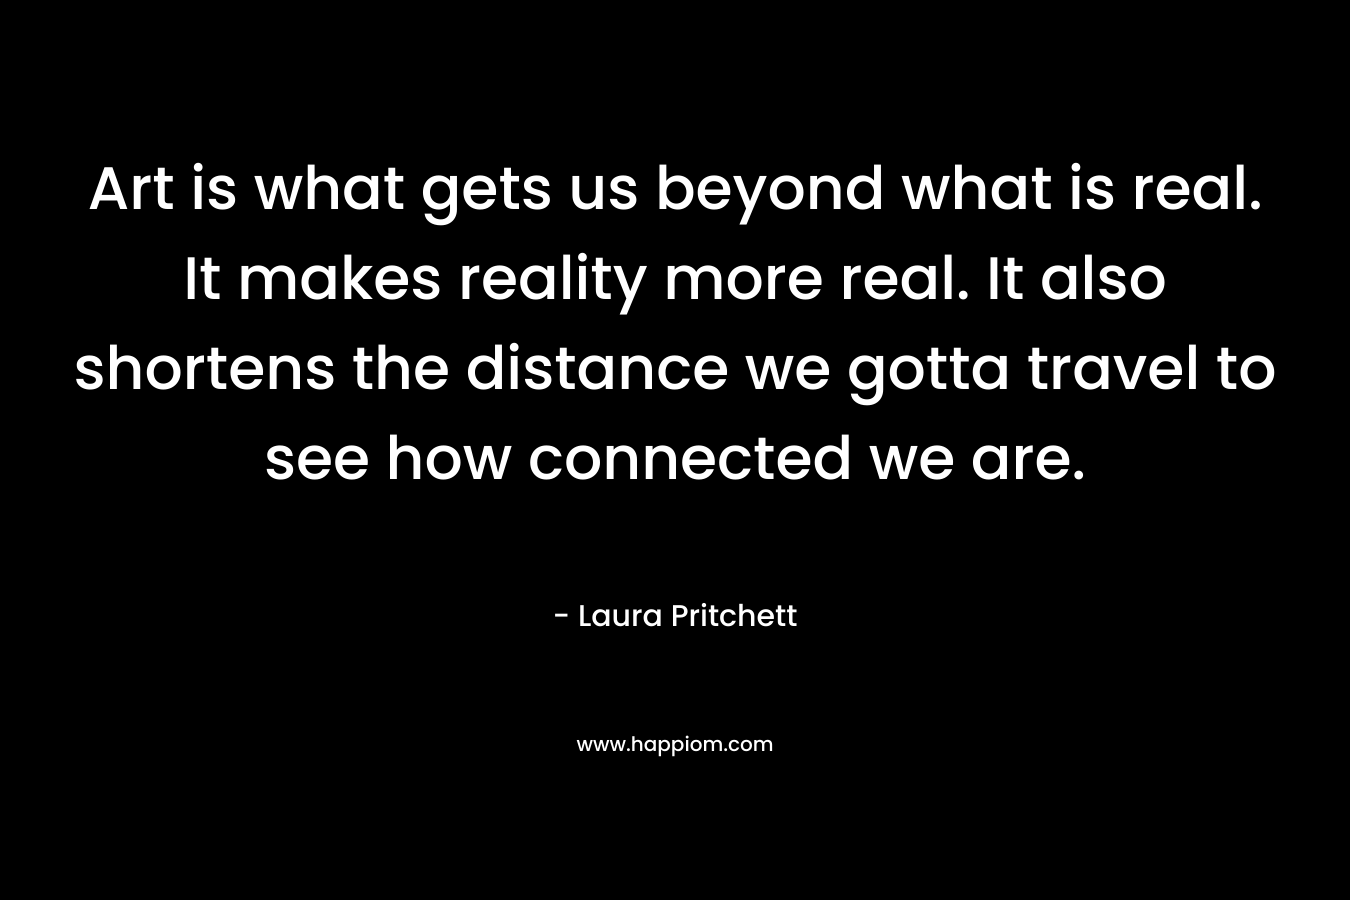 Art is what gets us beyond what is real. It makes reality more real. It also shortens the distance we gotta travel to see how connected we are.  – Laura Pritchett